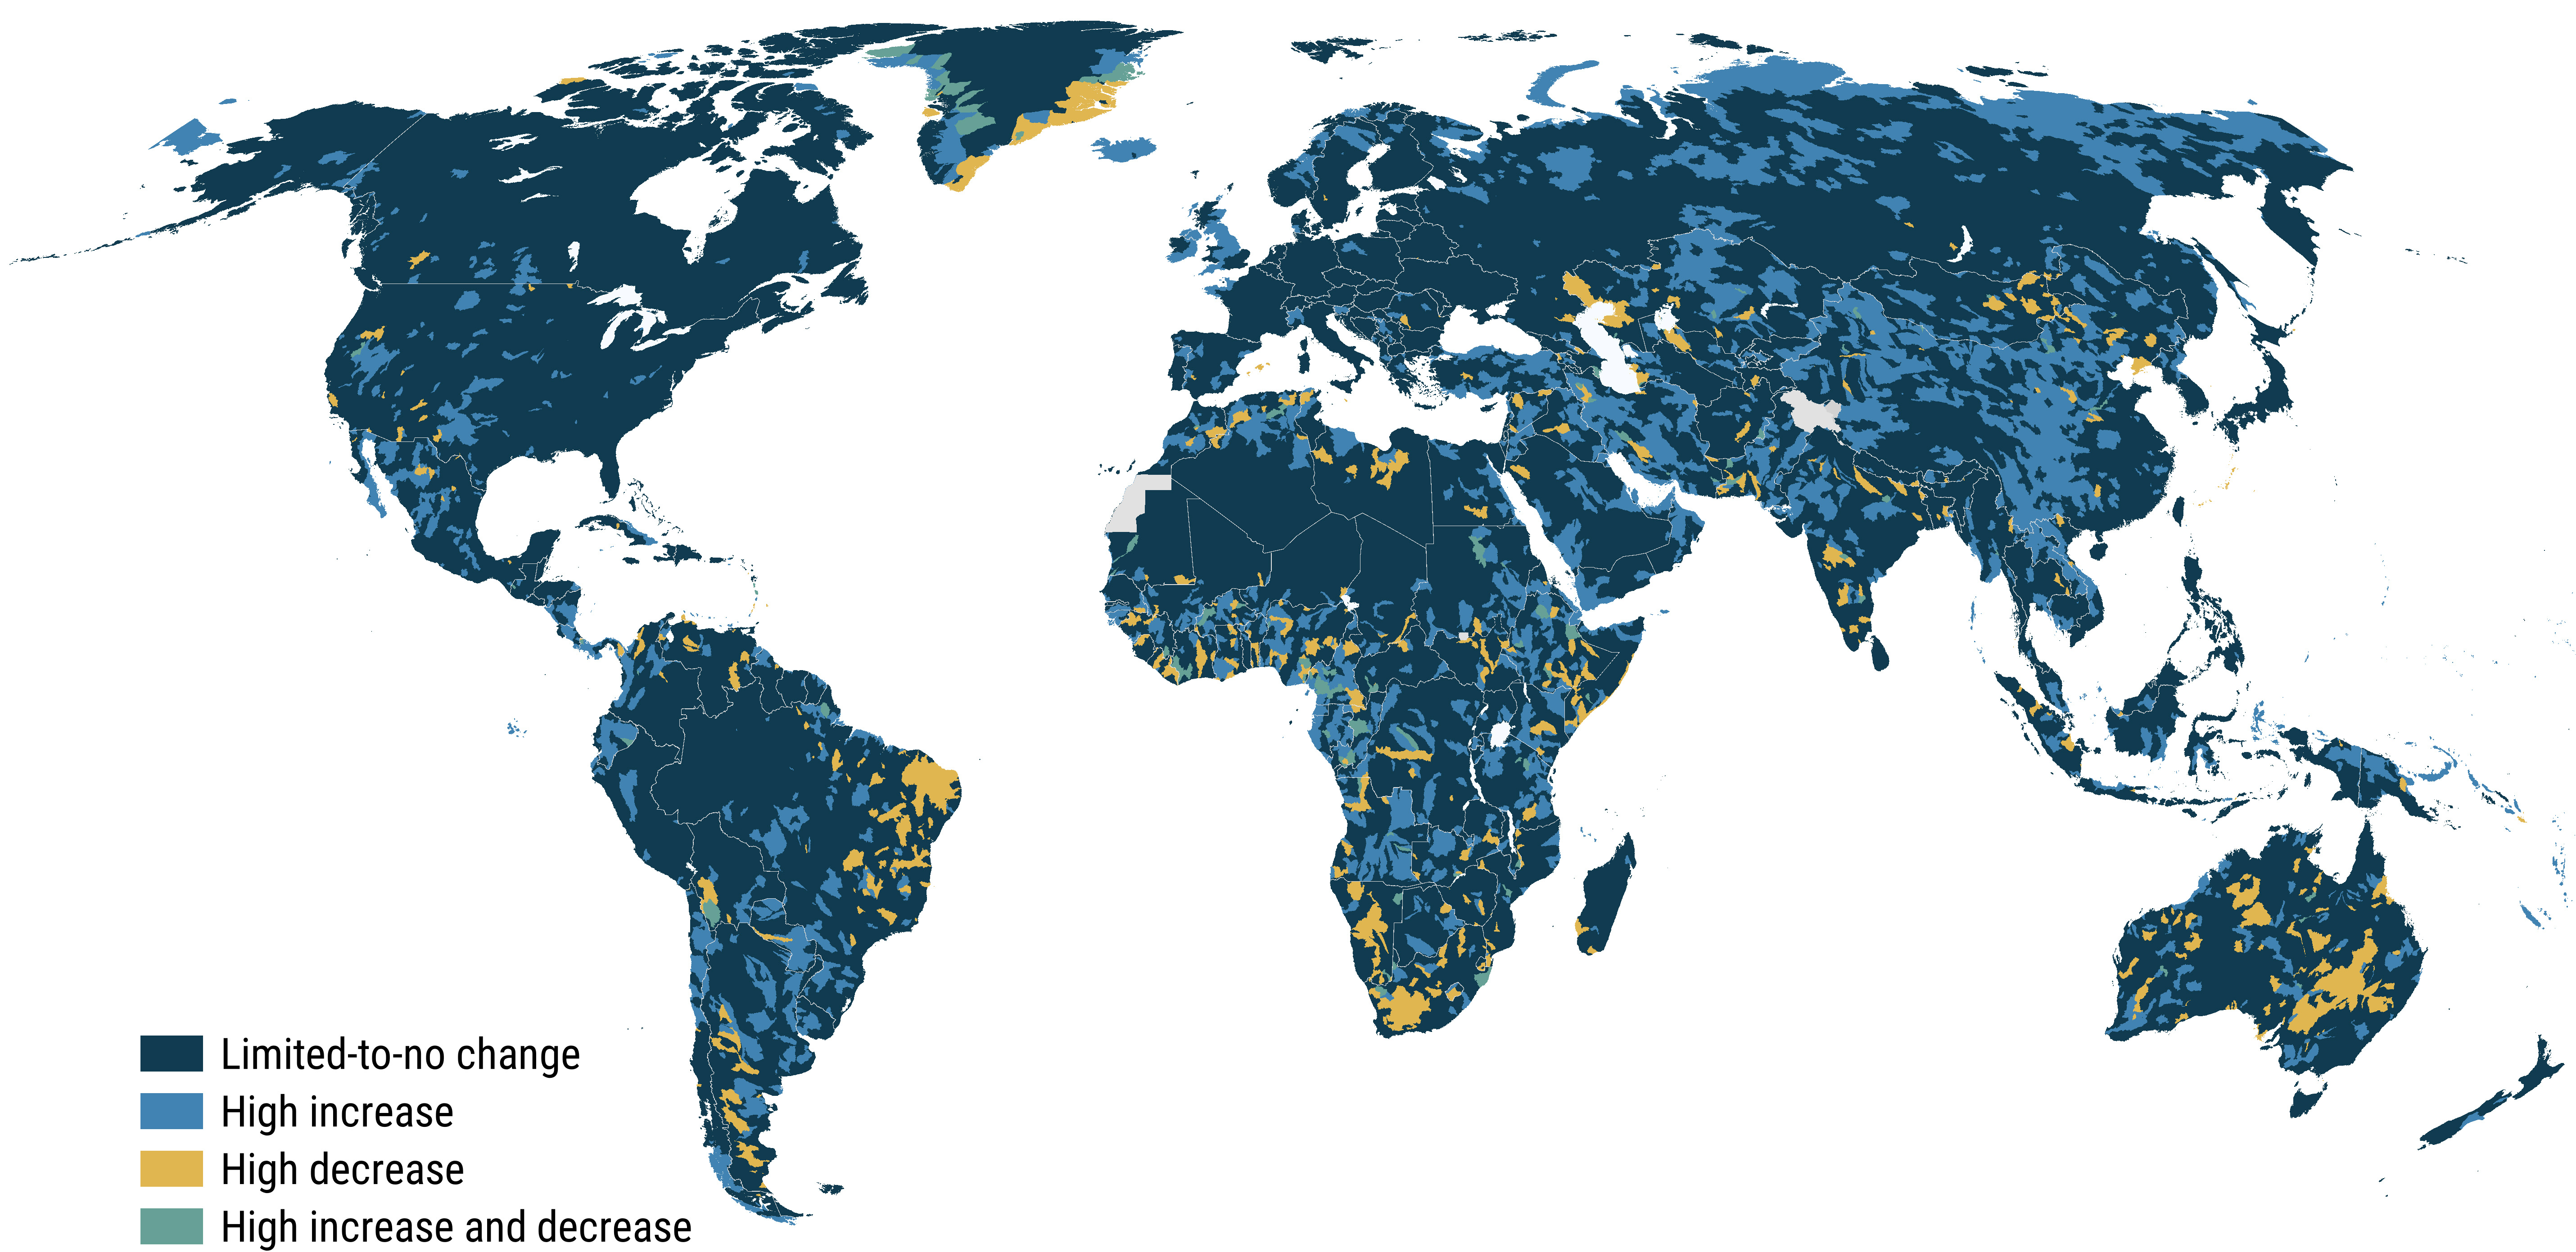 Global map of river basins with observed high increase and/or decrease in surface water area during 2015–2019 compared with 2000–2019 [11].